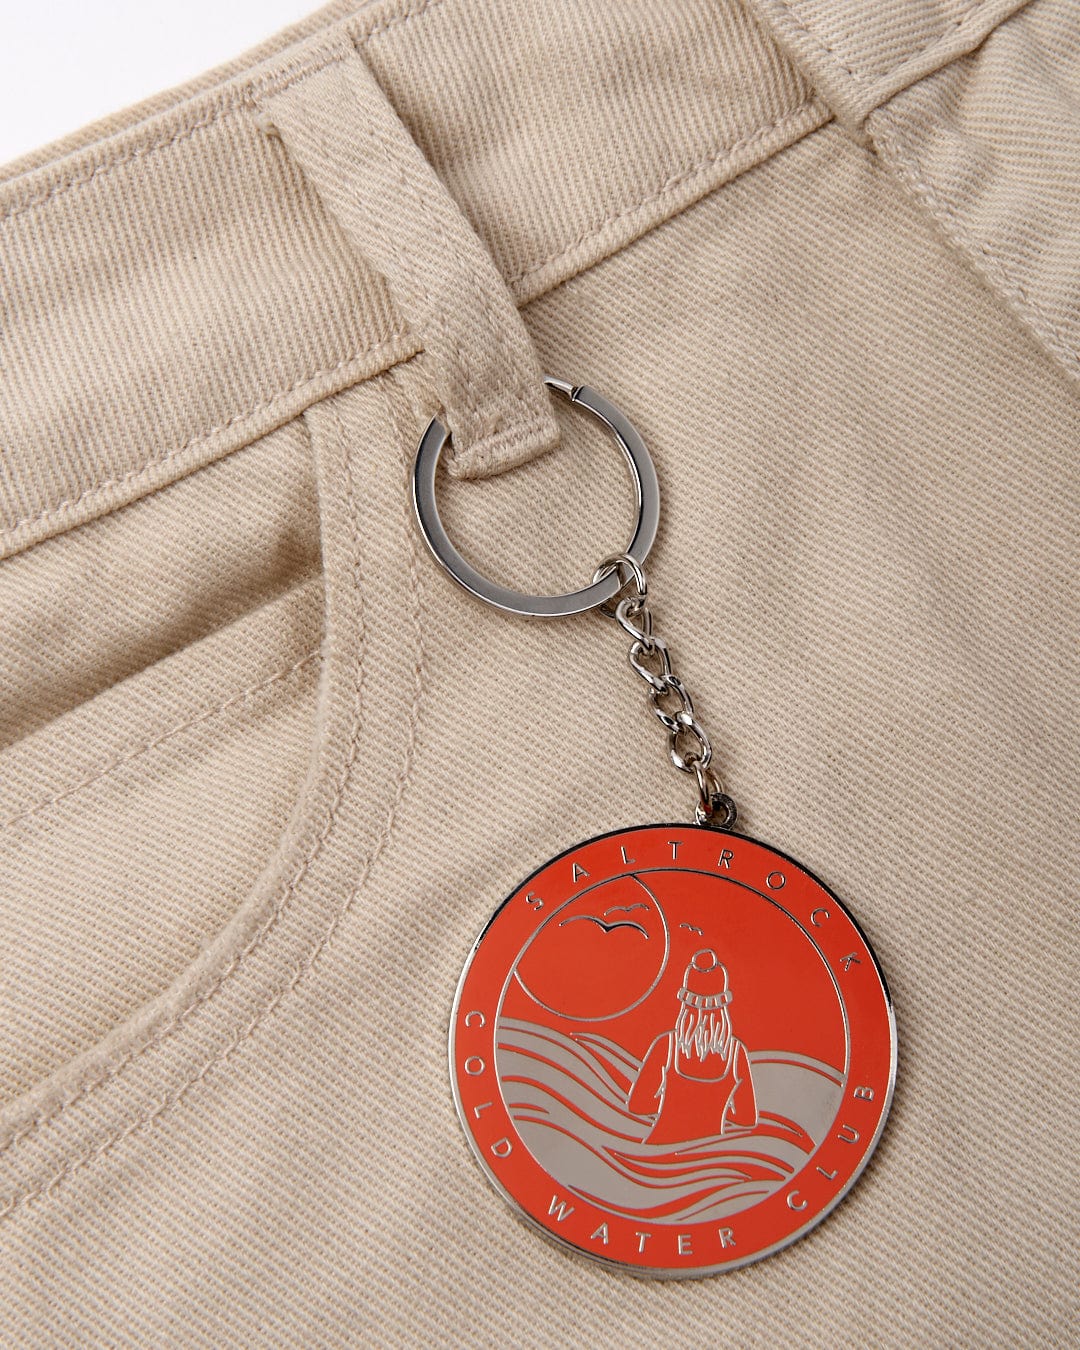 Keychain with a Saltrock "Cold Water Club" circular logo attached to a belt loop of beige trousers.